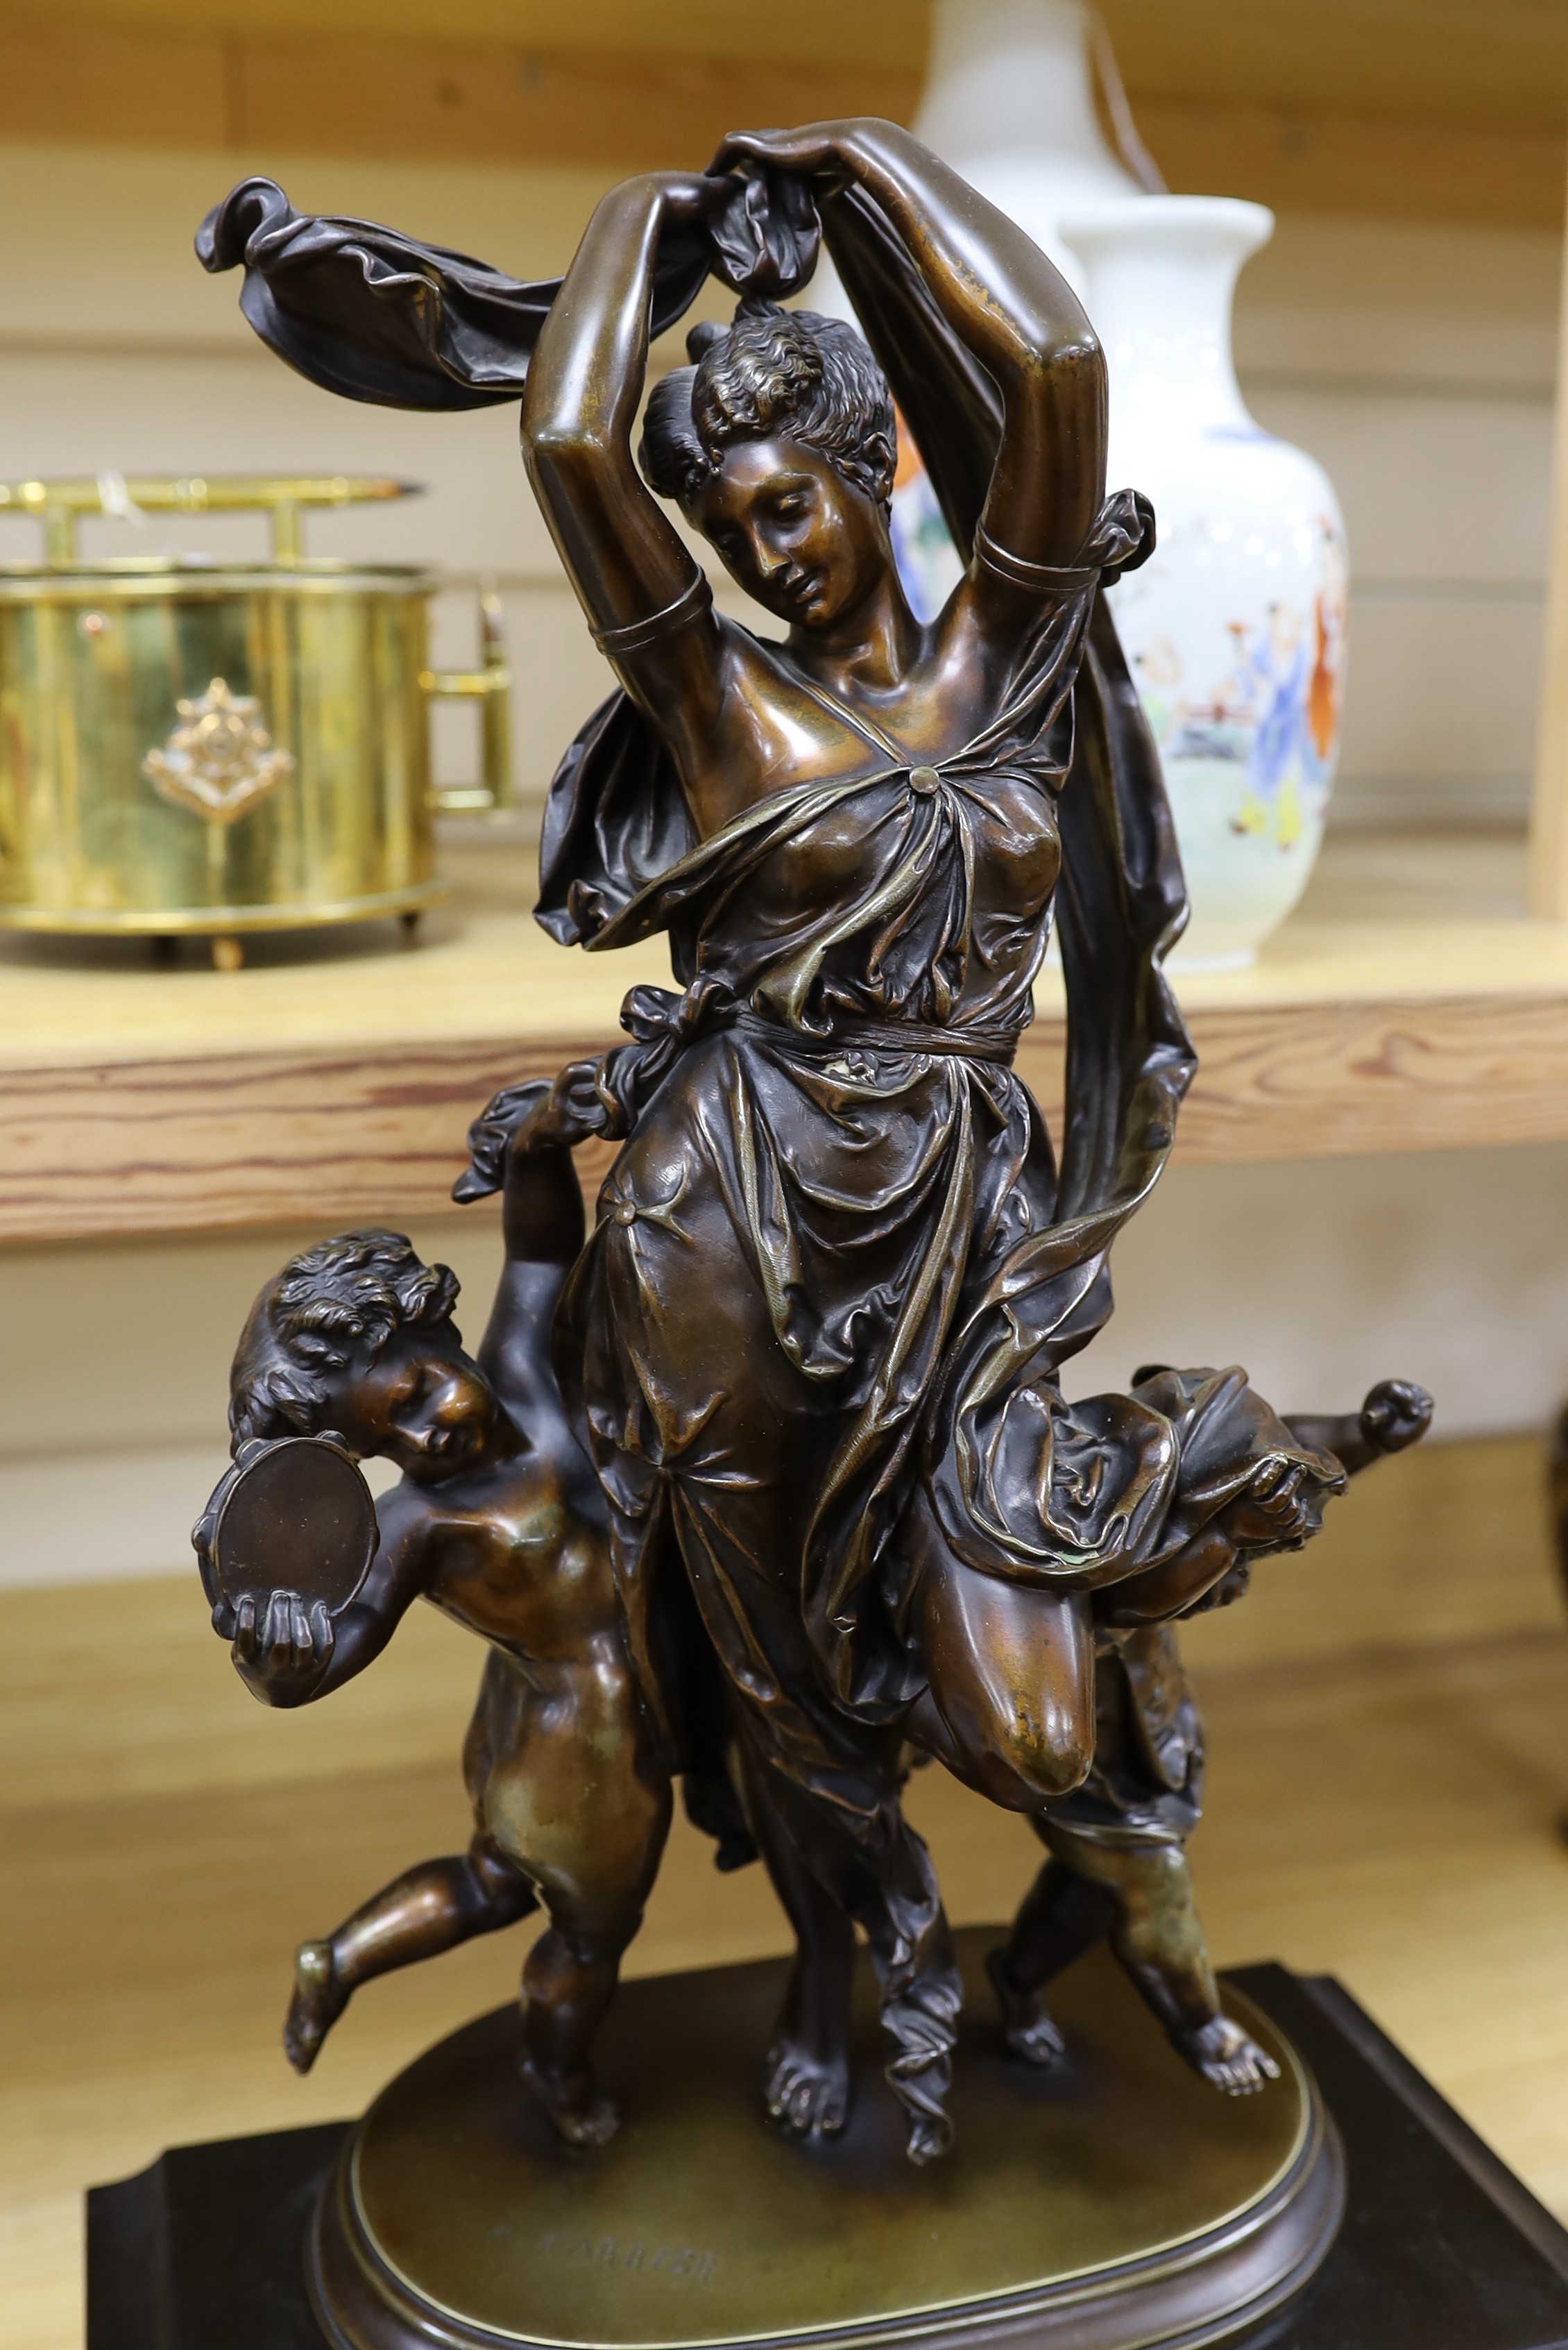 A late 19th century French bronze figural mantel clock, A. Carrier, 66cm